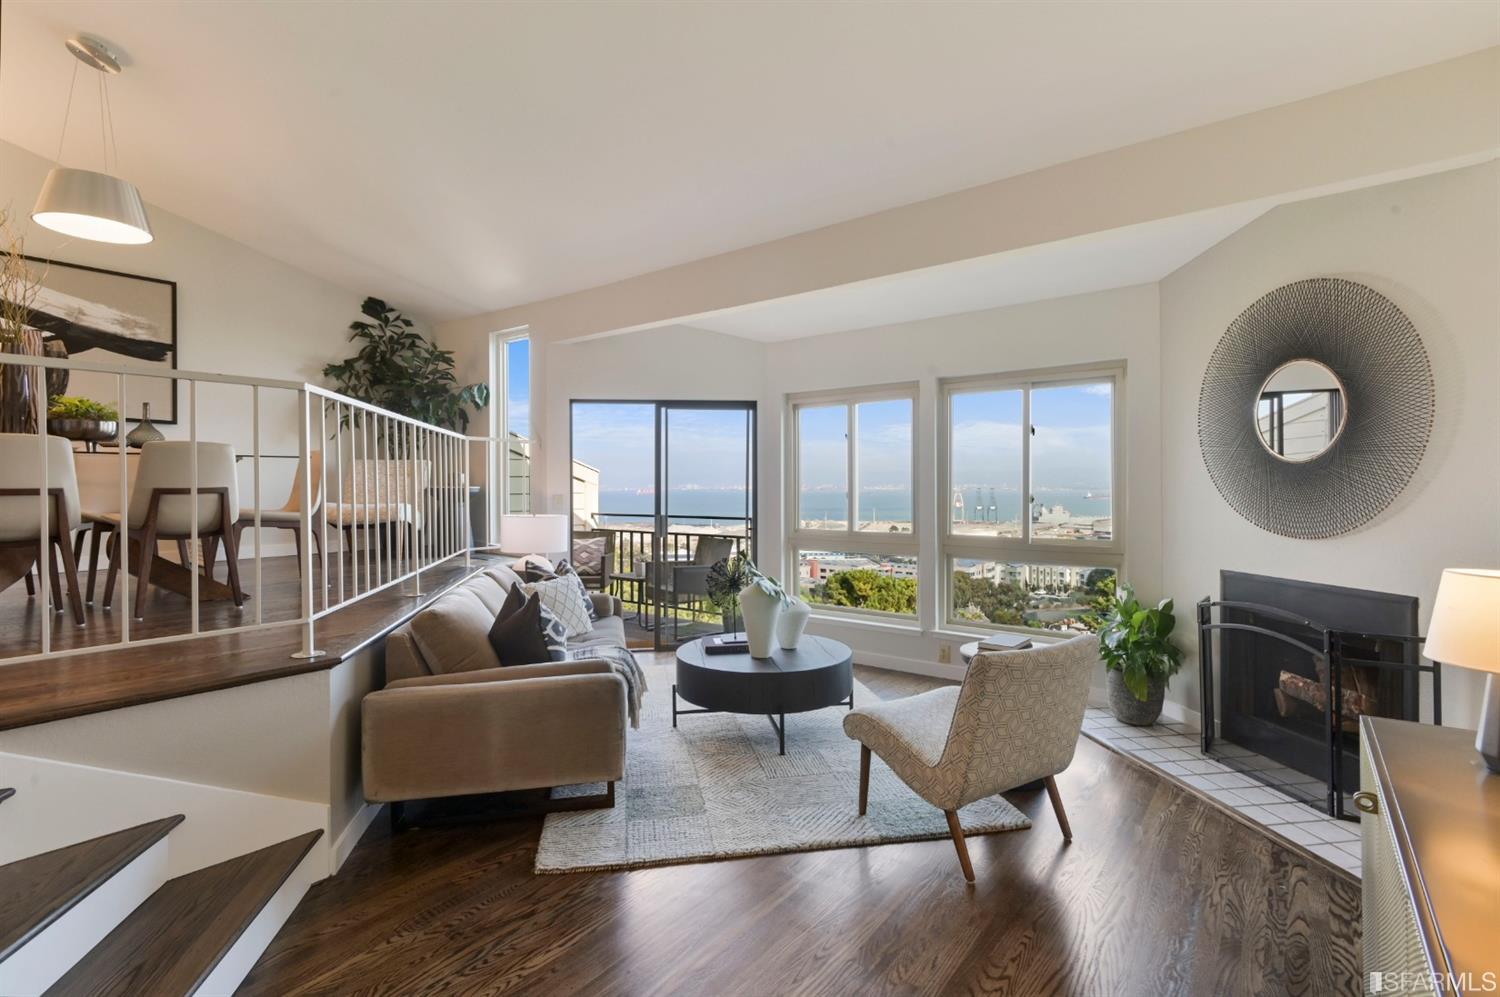 An open living/dining area with fireplace, gorgeous wood floors, and spectacular views.